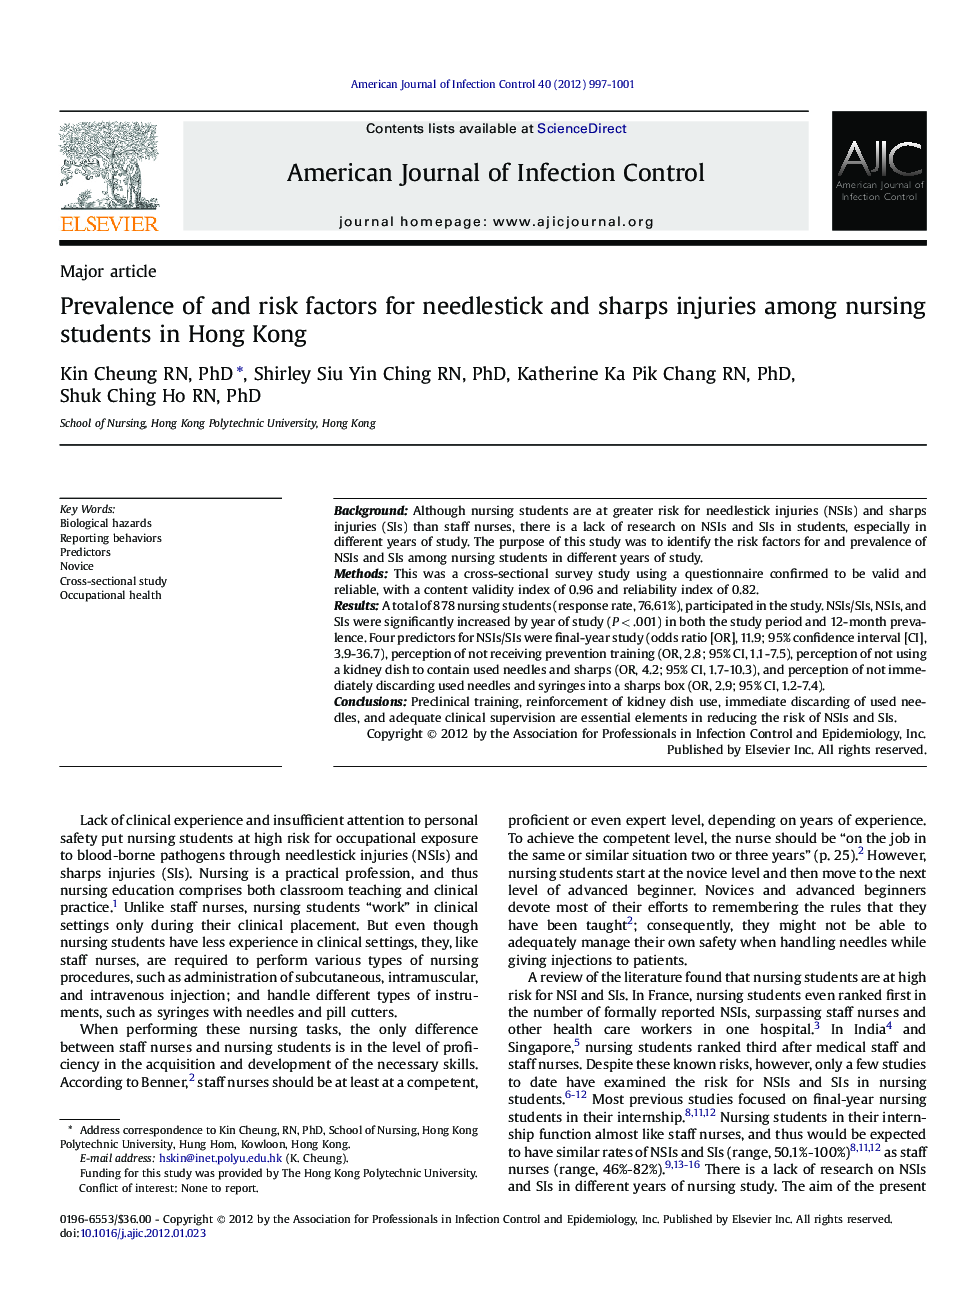 Prevalence of and risk factors for needlestick and sharps injuries among nursing students in Hong Kong 